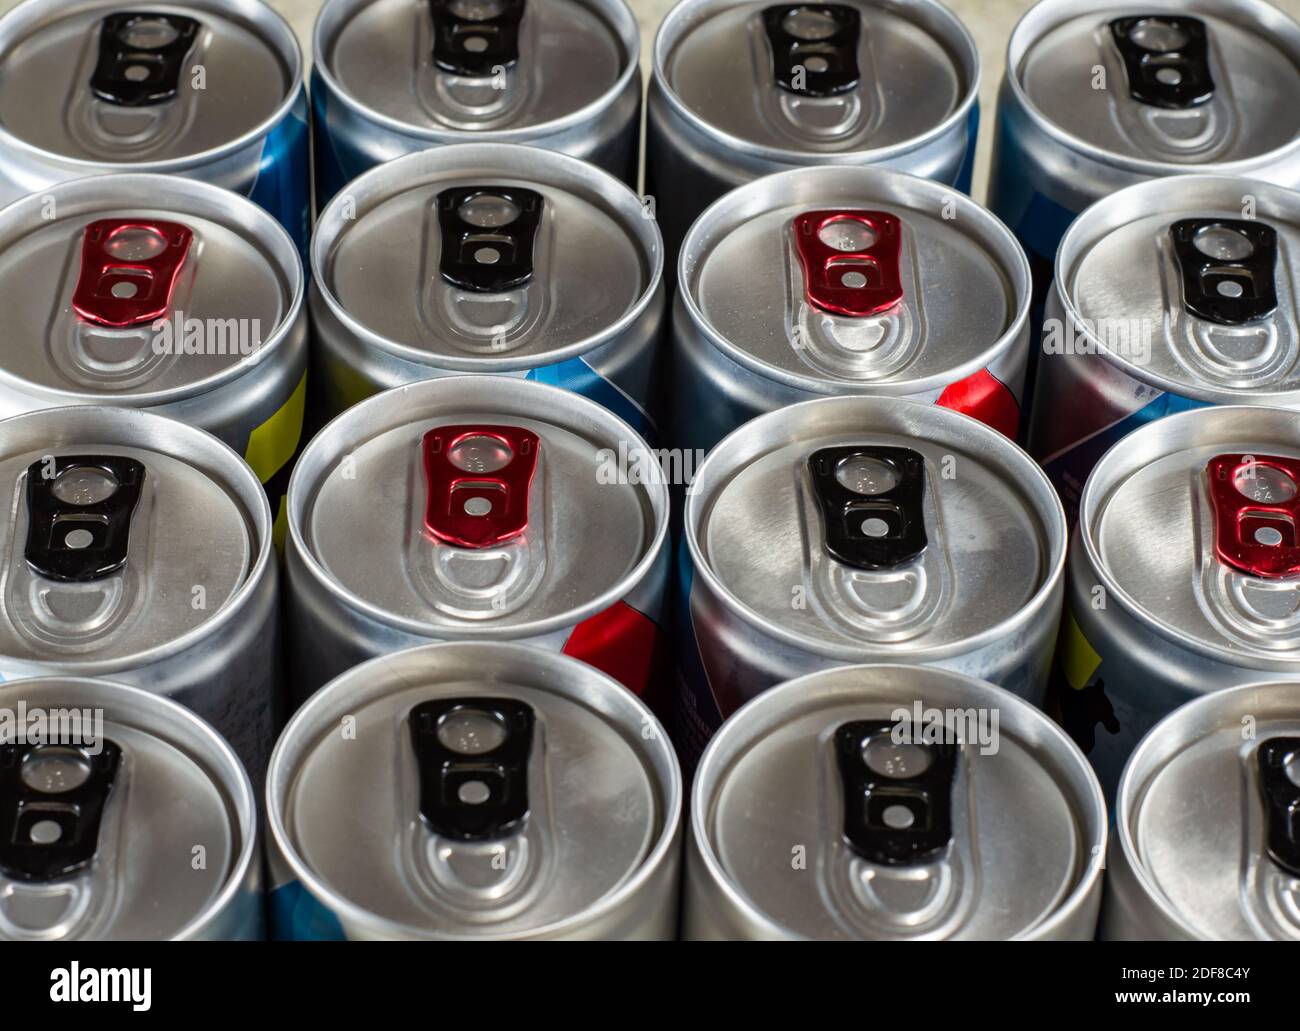 Shiny Silver Aluminum Soda Cans in a Group Stock Photo